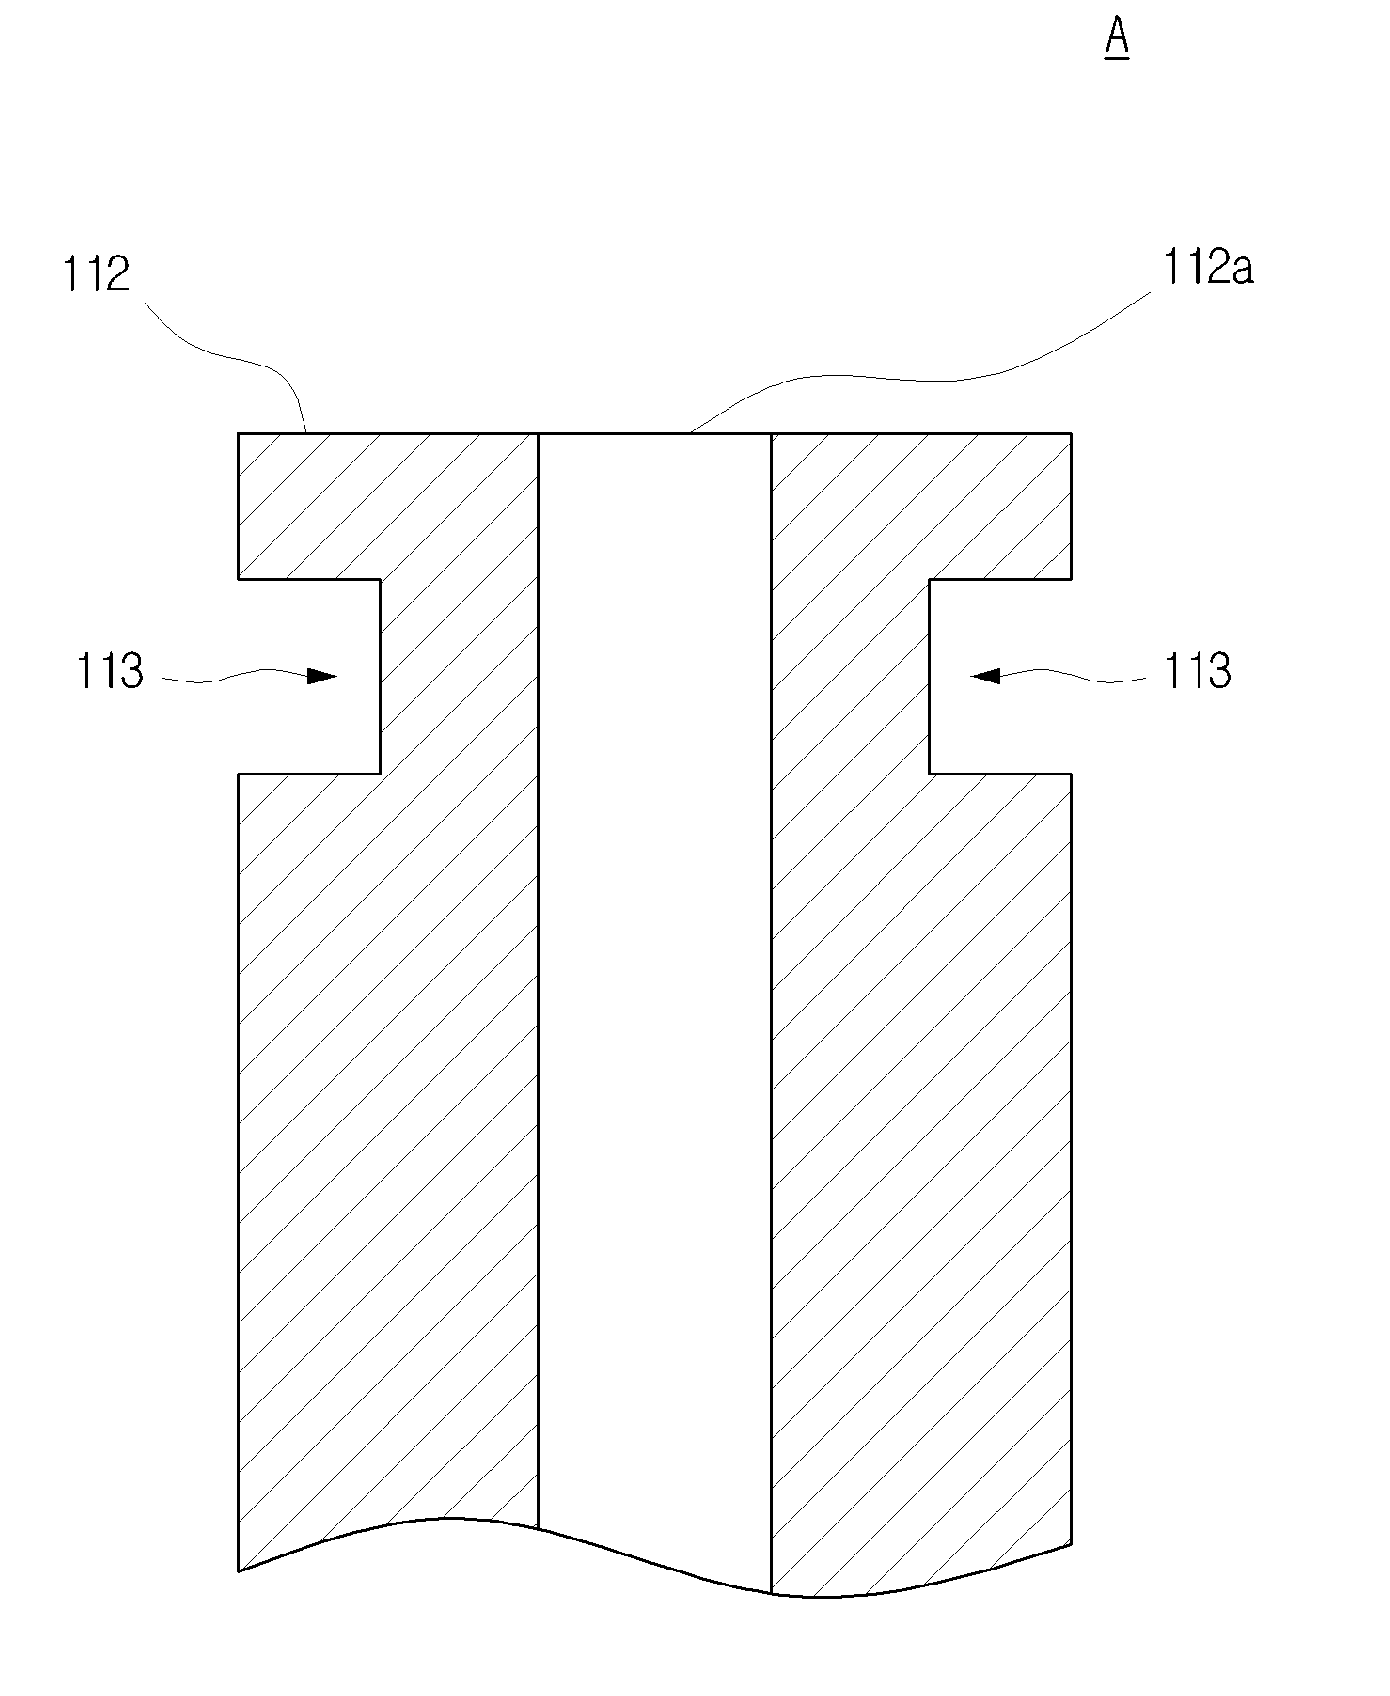 Discharging nozzle and electrostatic field induction ink-jet nozzle